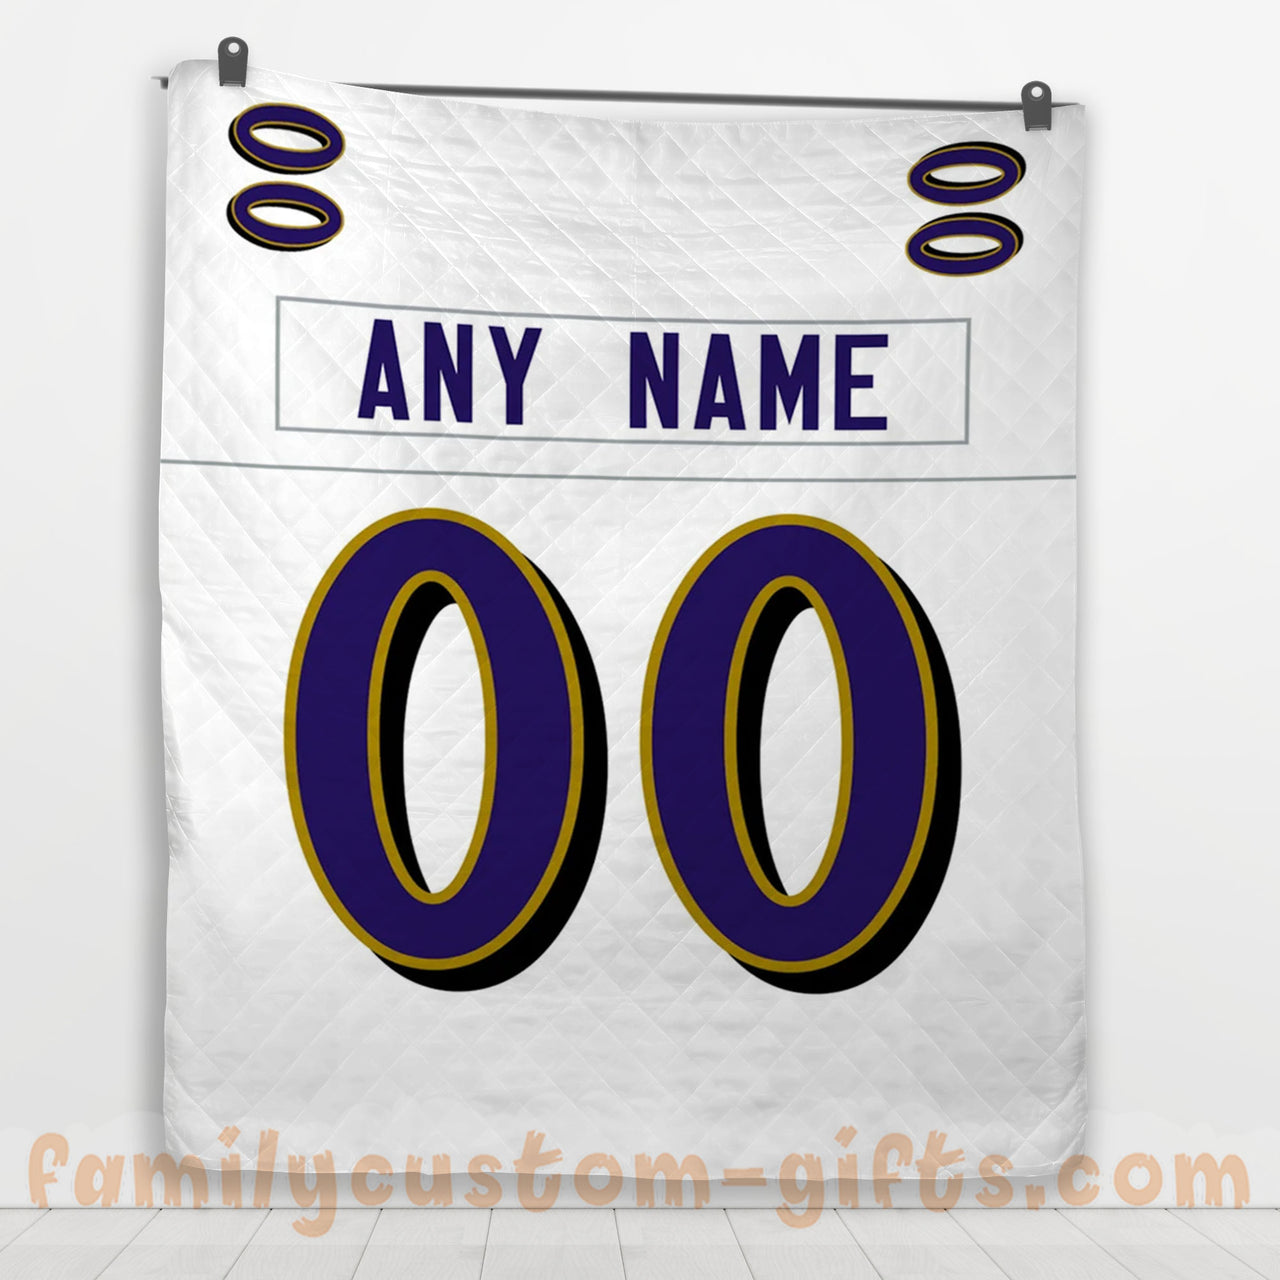 Custom Premium Quilt Blanket Baltimore Jersey American Football Personalized Quilt Gifts for Her & Him